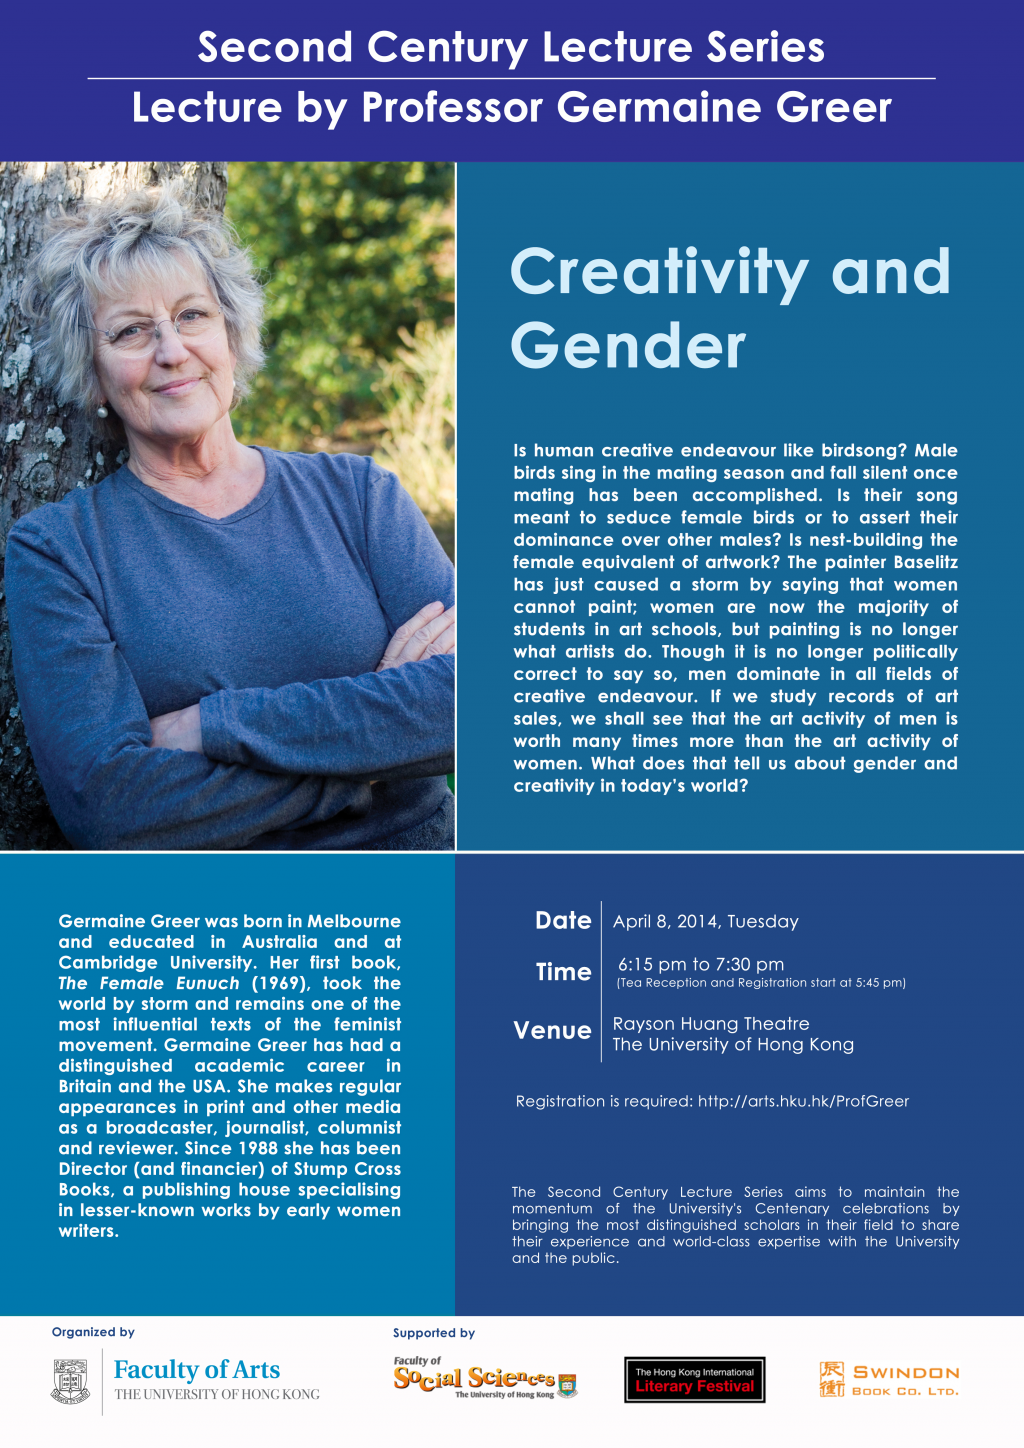 Second Century Lecture Series - Lecture by Professor Germaine Greer